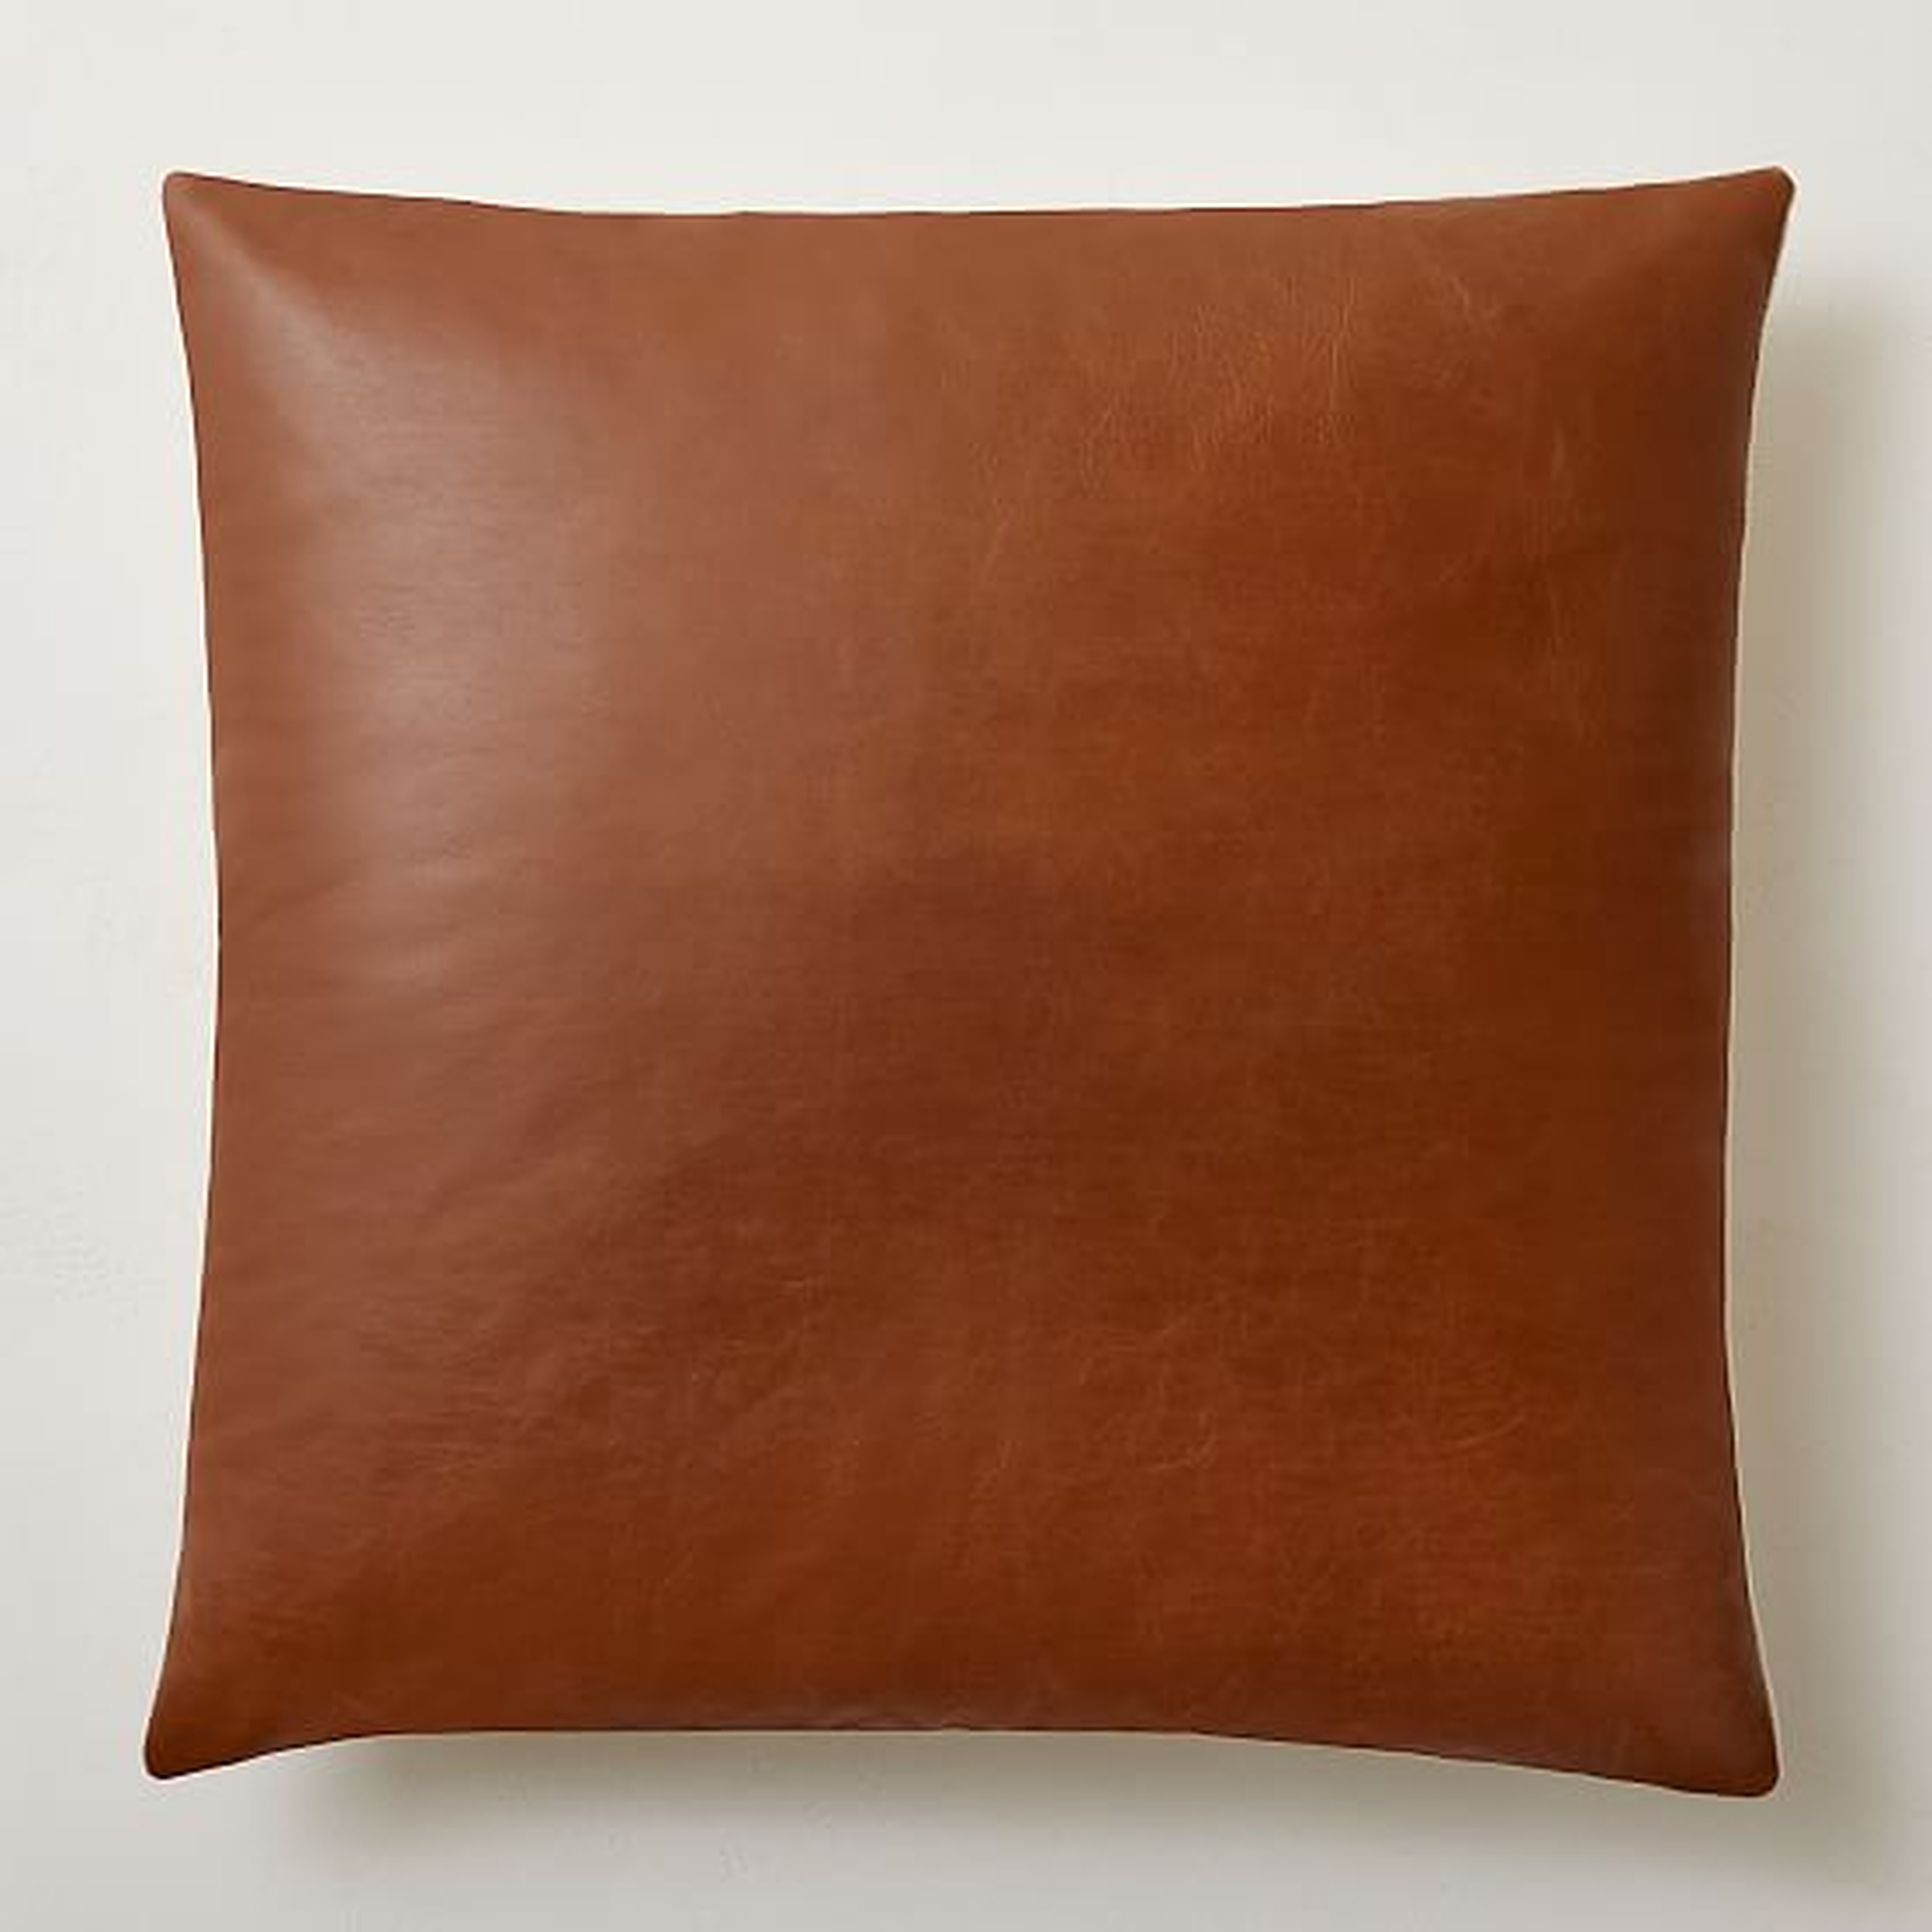 Leather Pillow Cover, 24"x24", Nut - West Elm